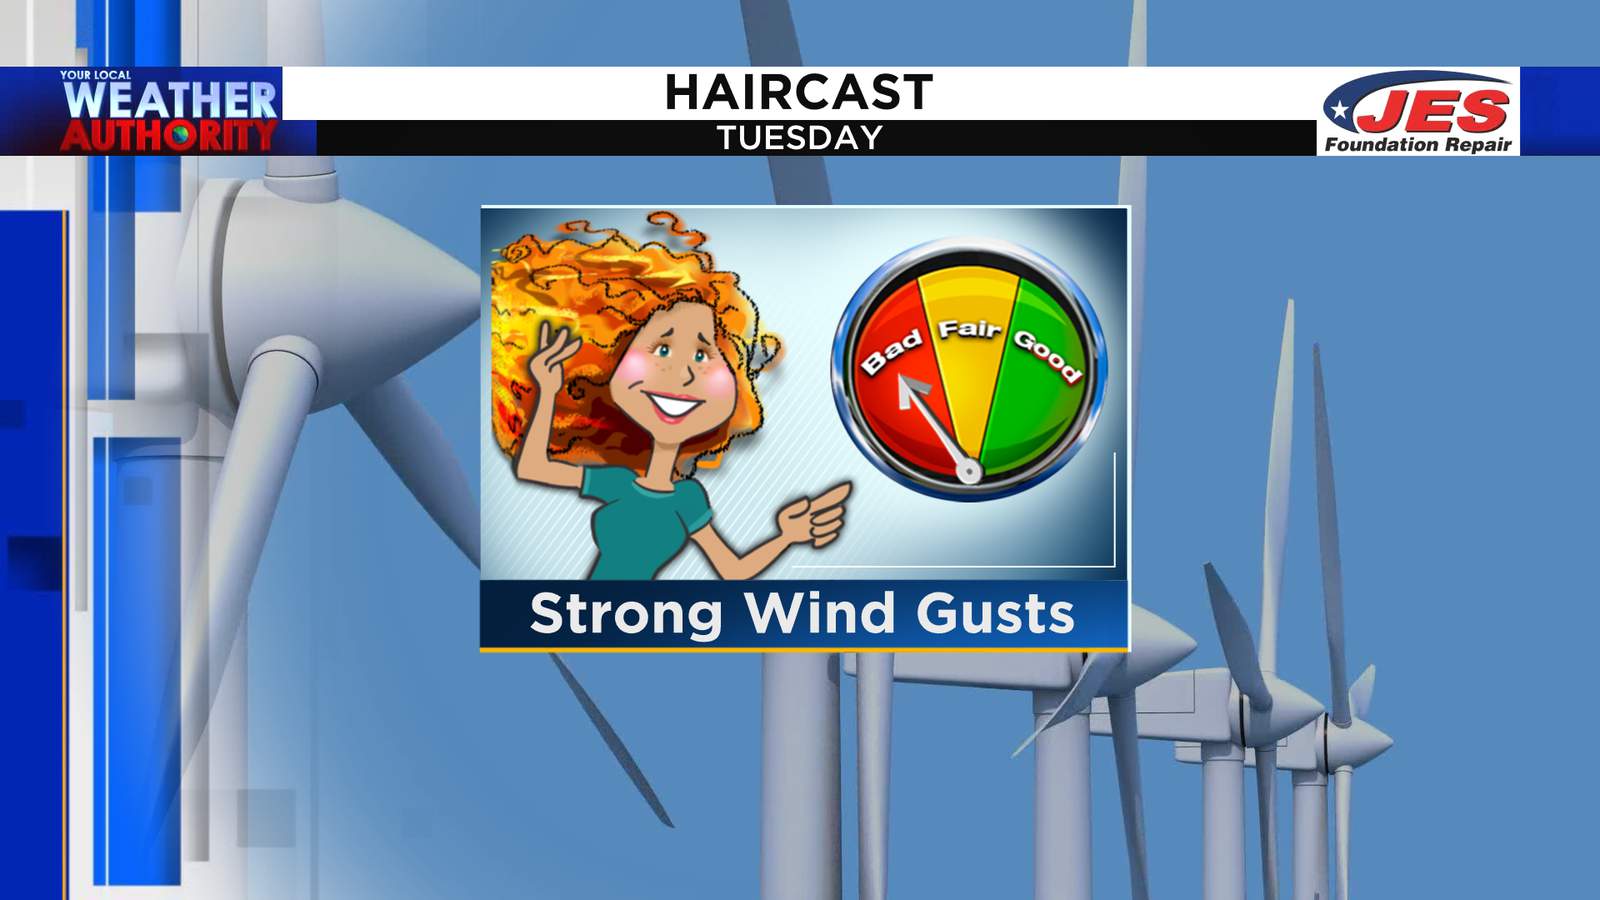 Own that ponytail, work that updo! Wind whips through Wednesday morning